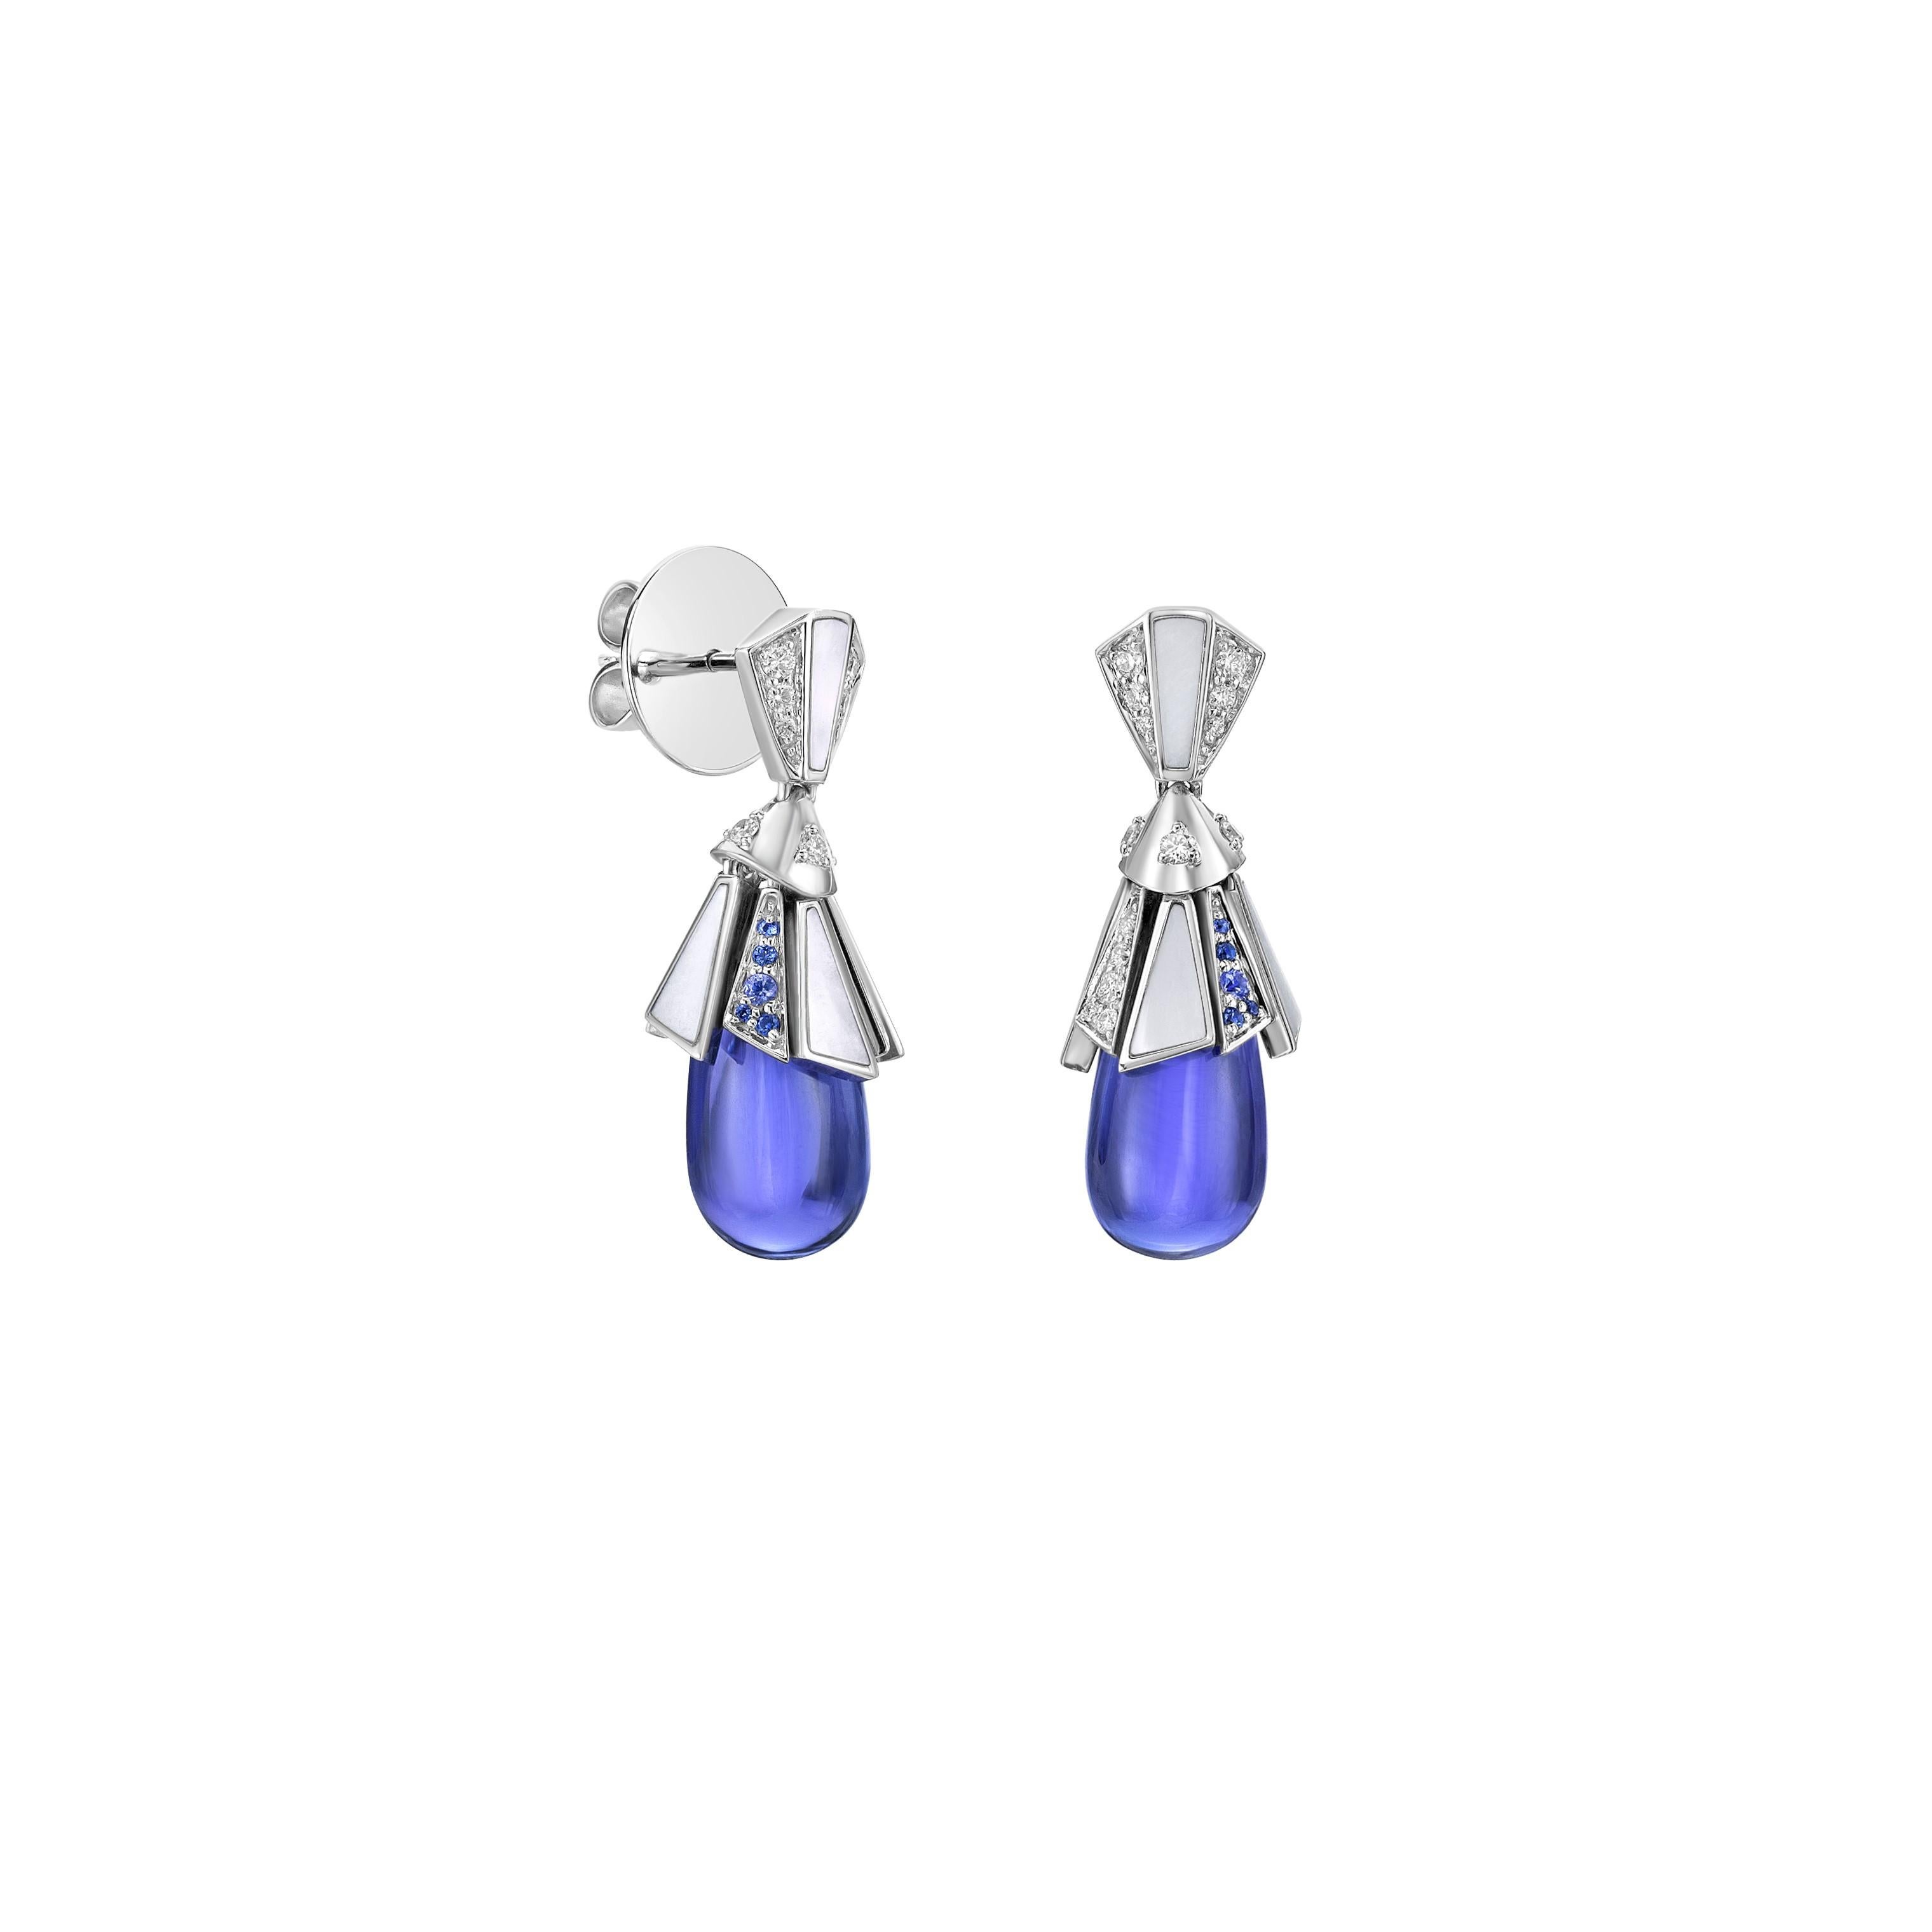 The earrings features a water drop-shaped Tanzanite stone with Tanzanite hue, adorned with mother of pearls. It's made of white gold and studded with blue sapphire, Mother of Pearl and diamonds, making it suitable for any function or special